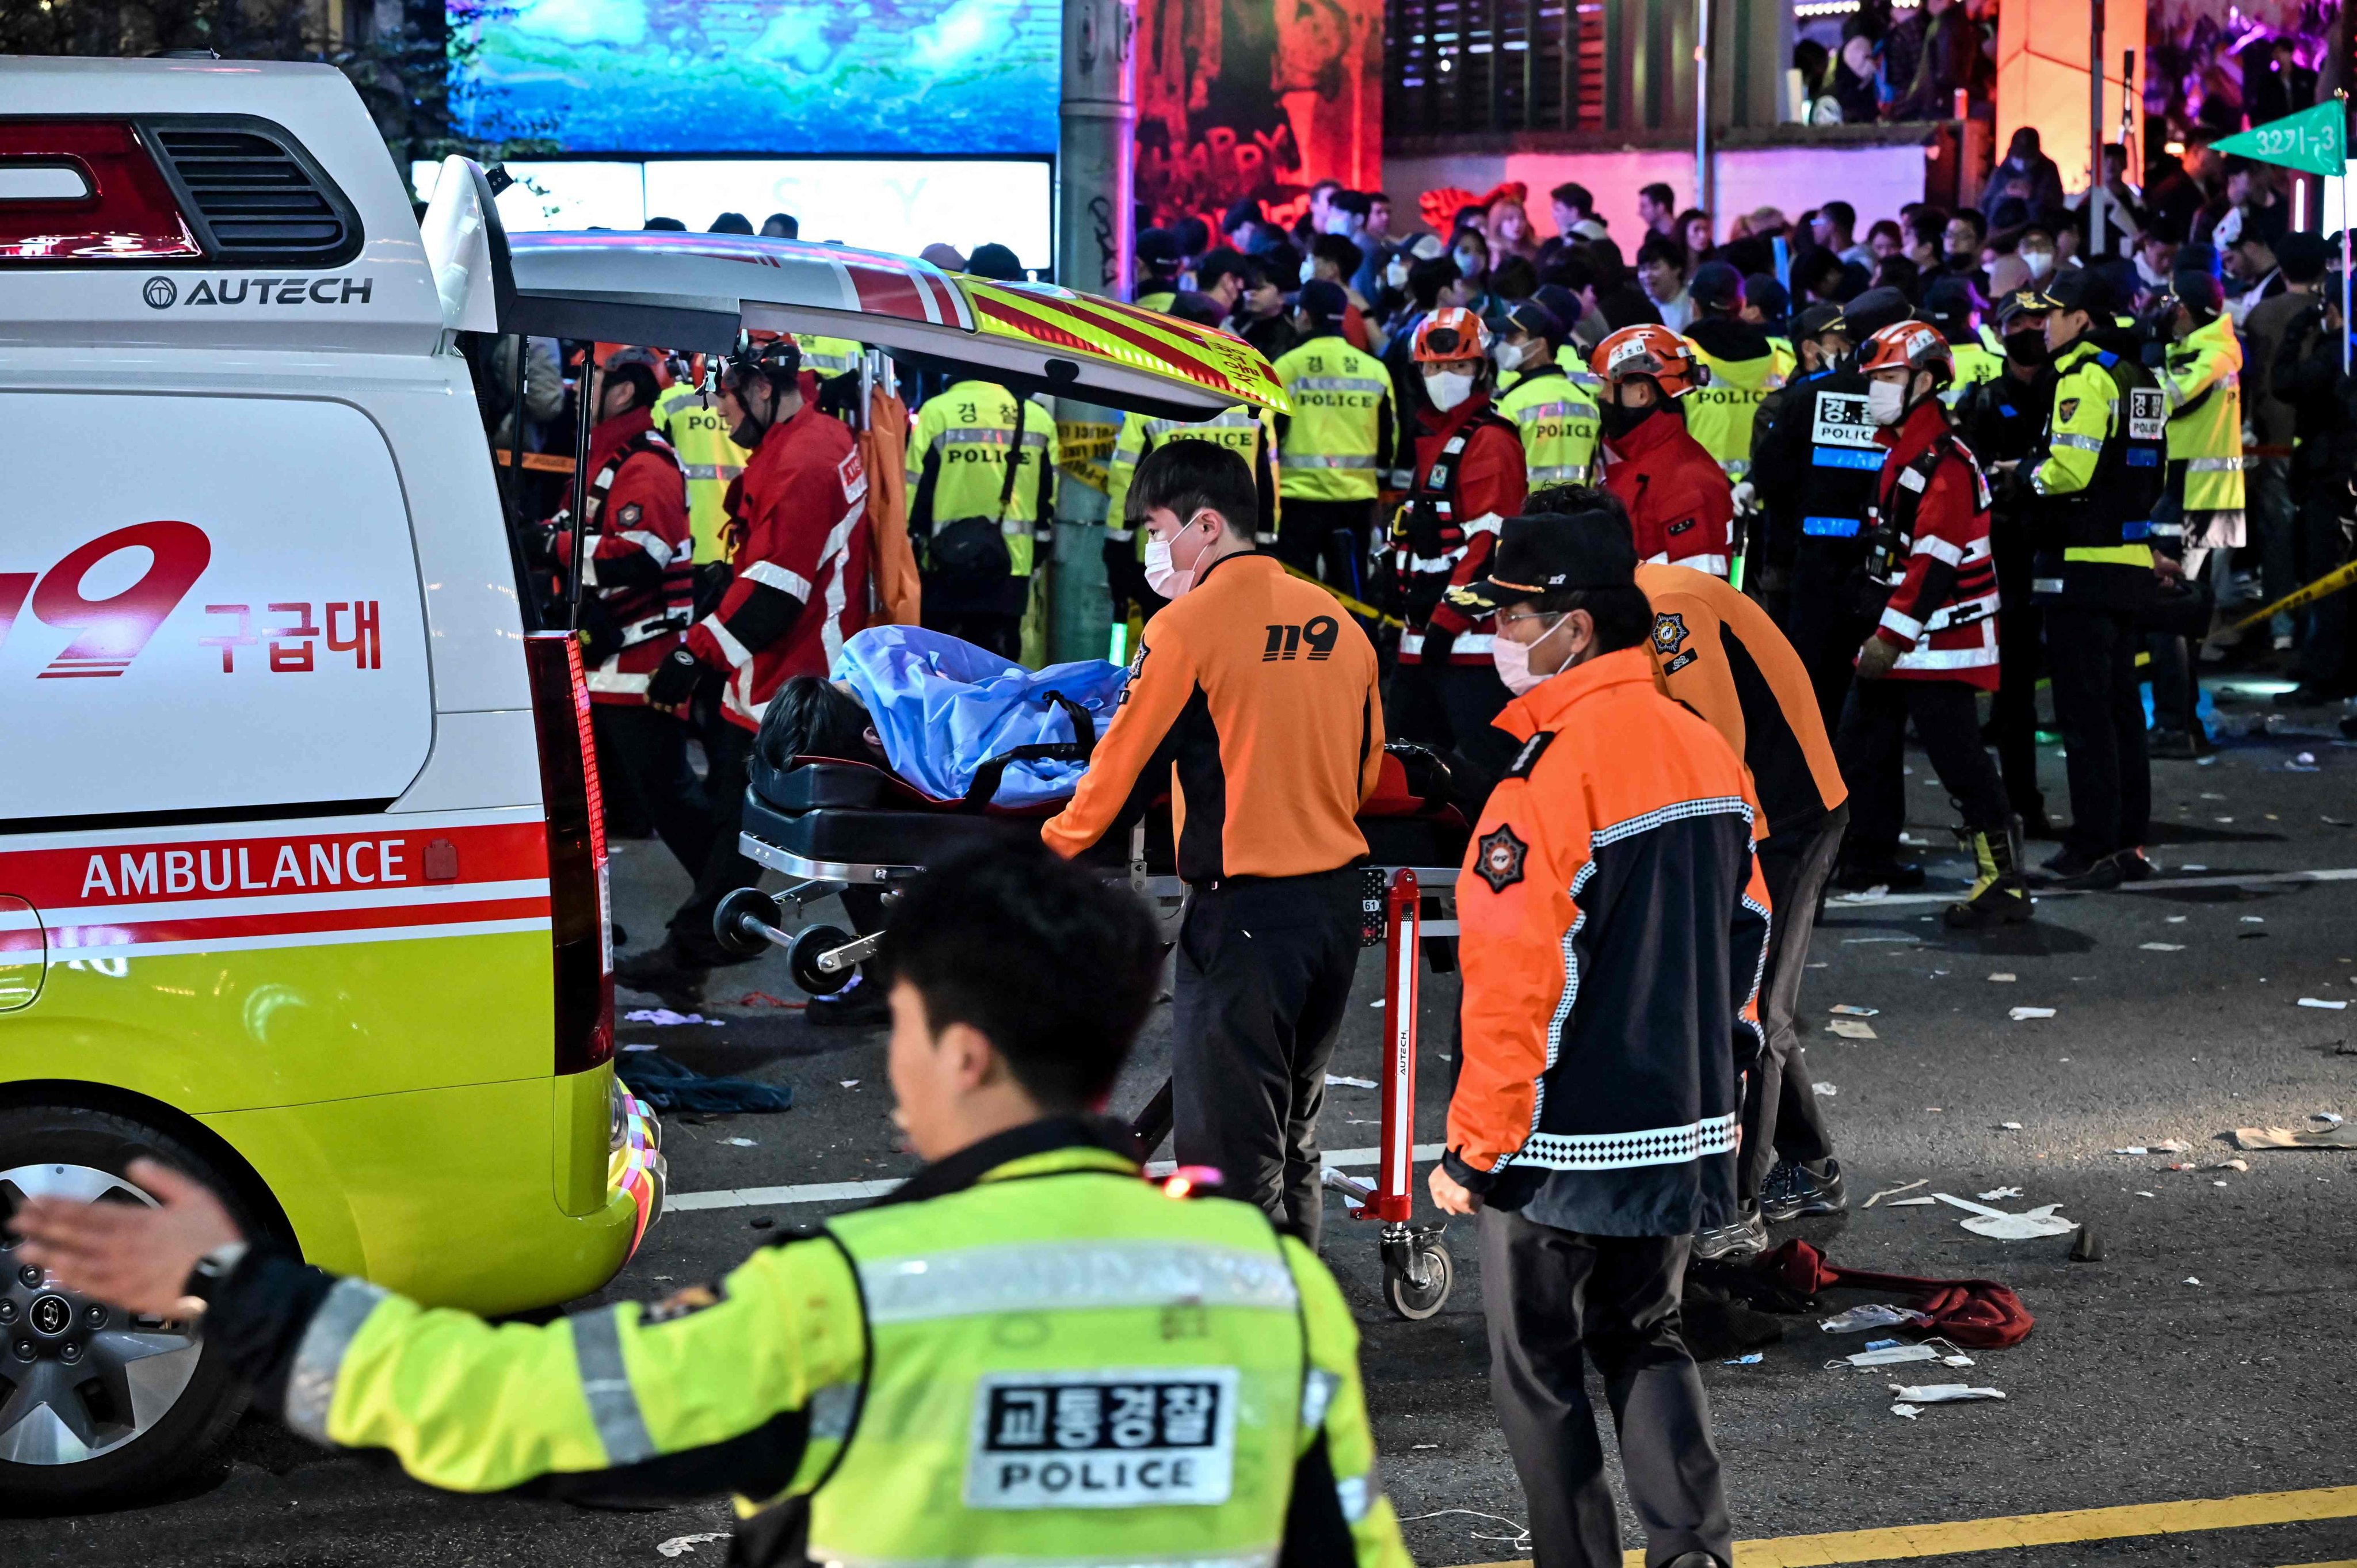 Paramedics attend to a victim believed to have suffered cardiac arrest in the popular nightlife district of Itaewon in Seoul on October 30. Photo: AFP